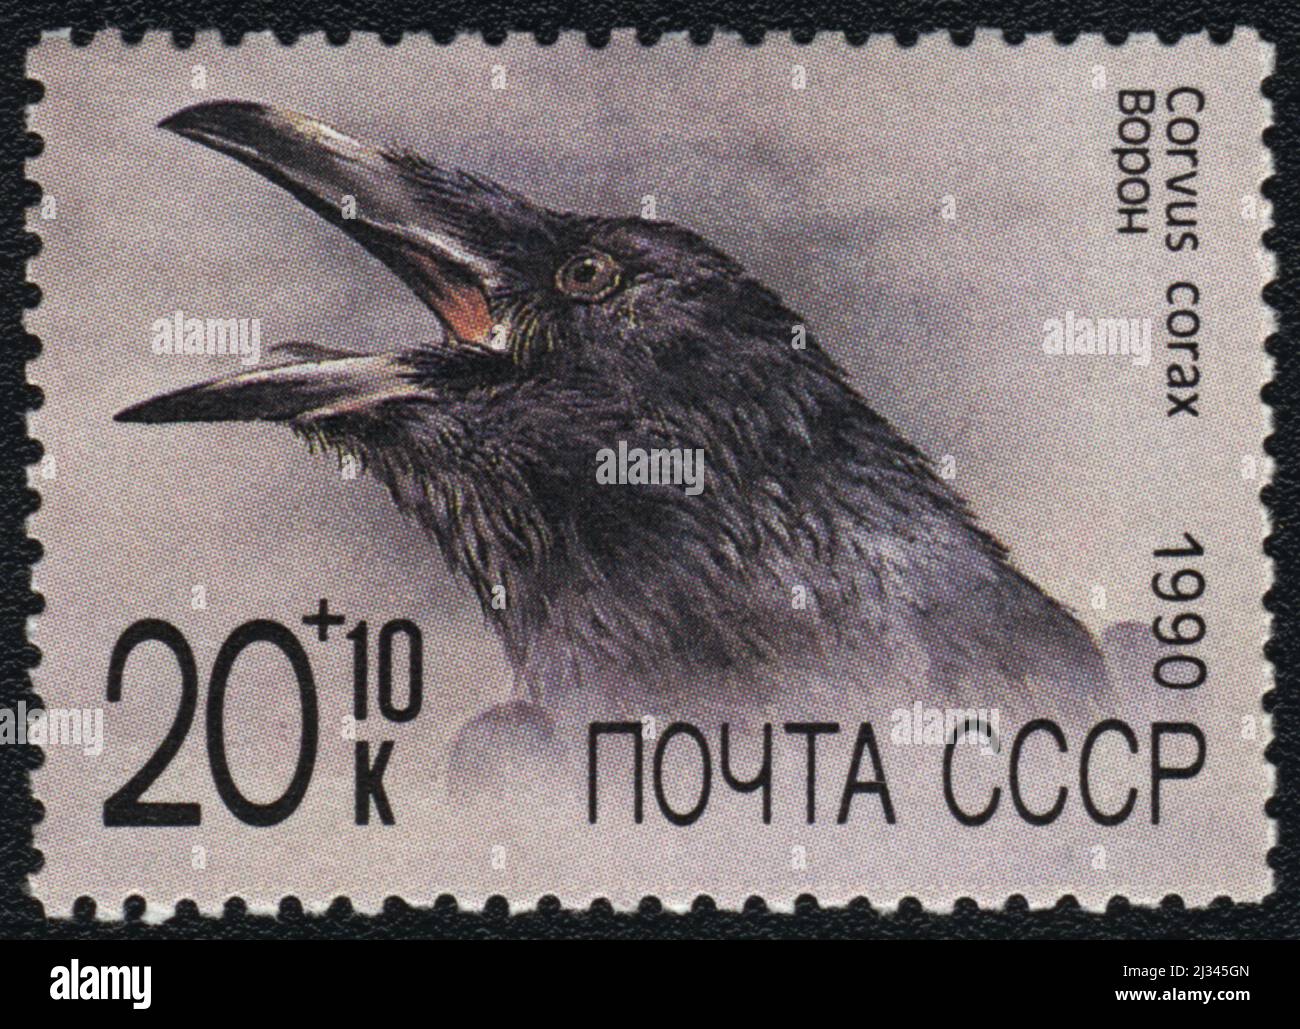 A postage stamp shows Common raven (Corvus corax), USSR, 1990 Stock Photo